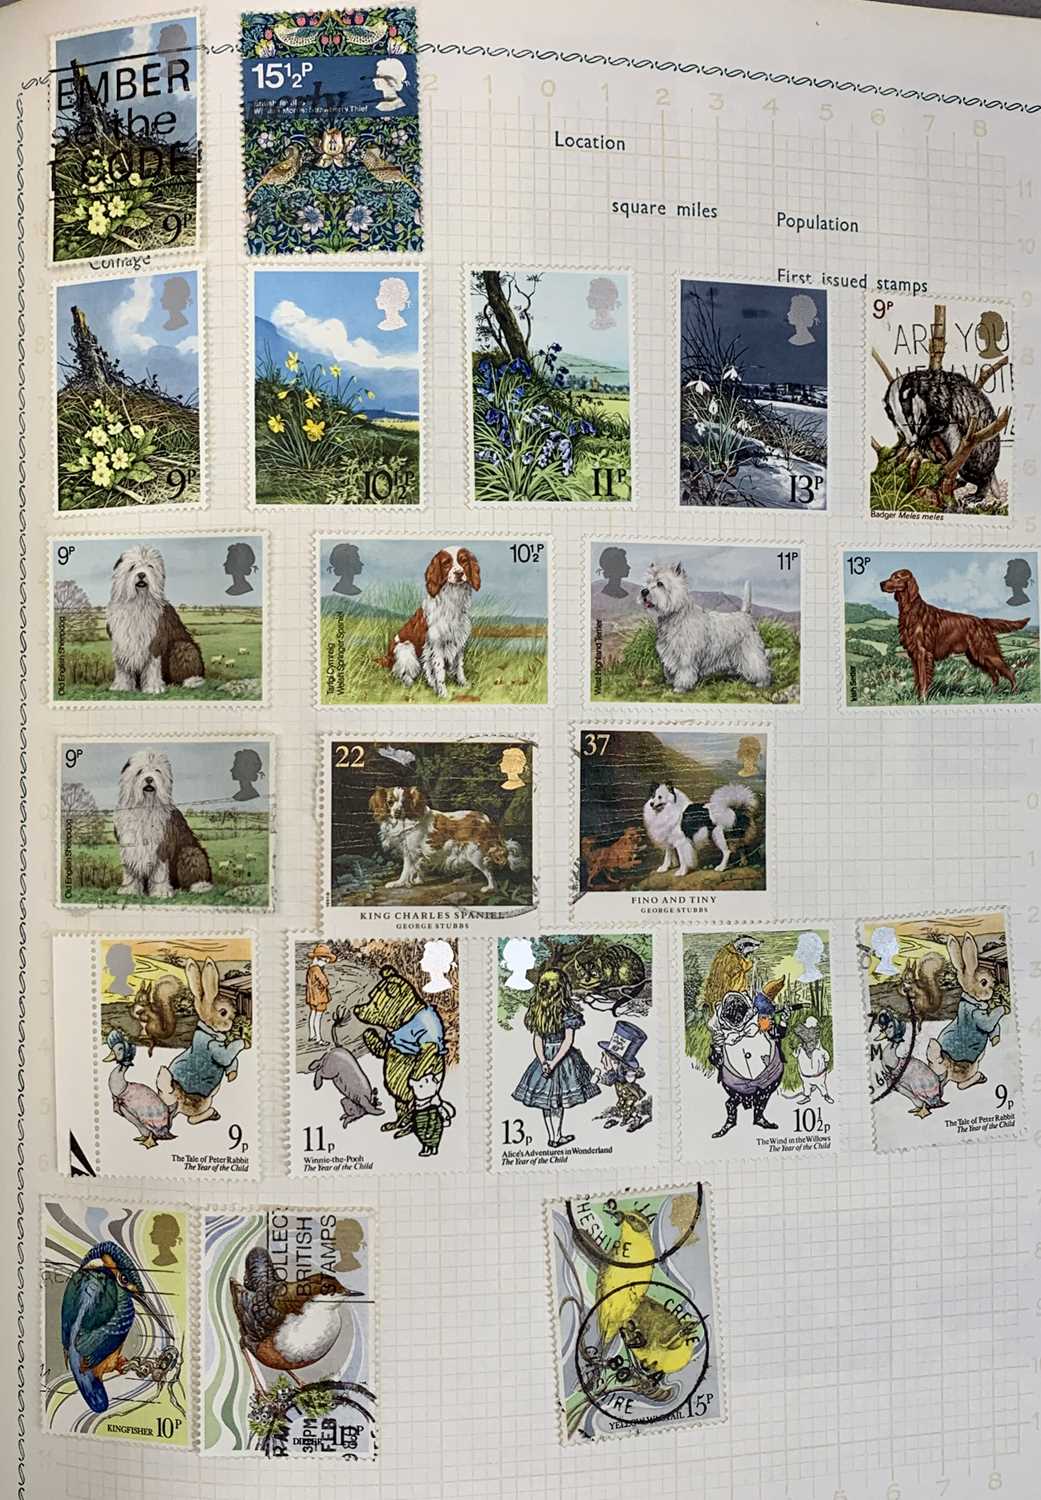 STAMPS - 'The Freelance Stamp Album' containing a well presented collection of British and - Image 8 of 11